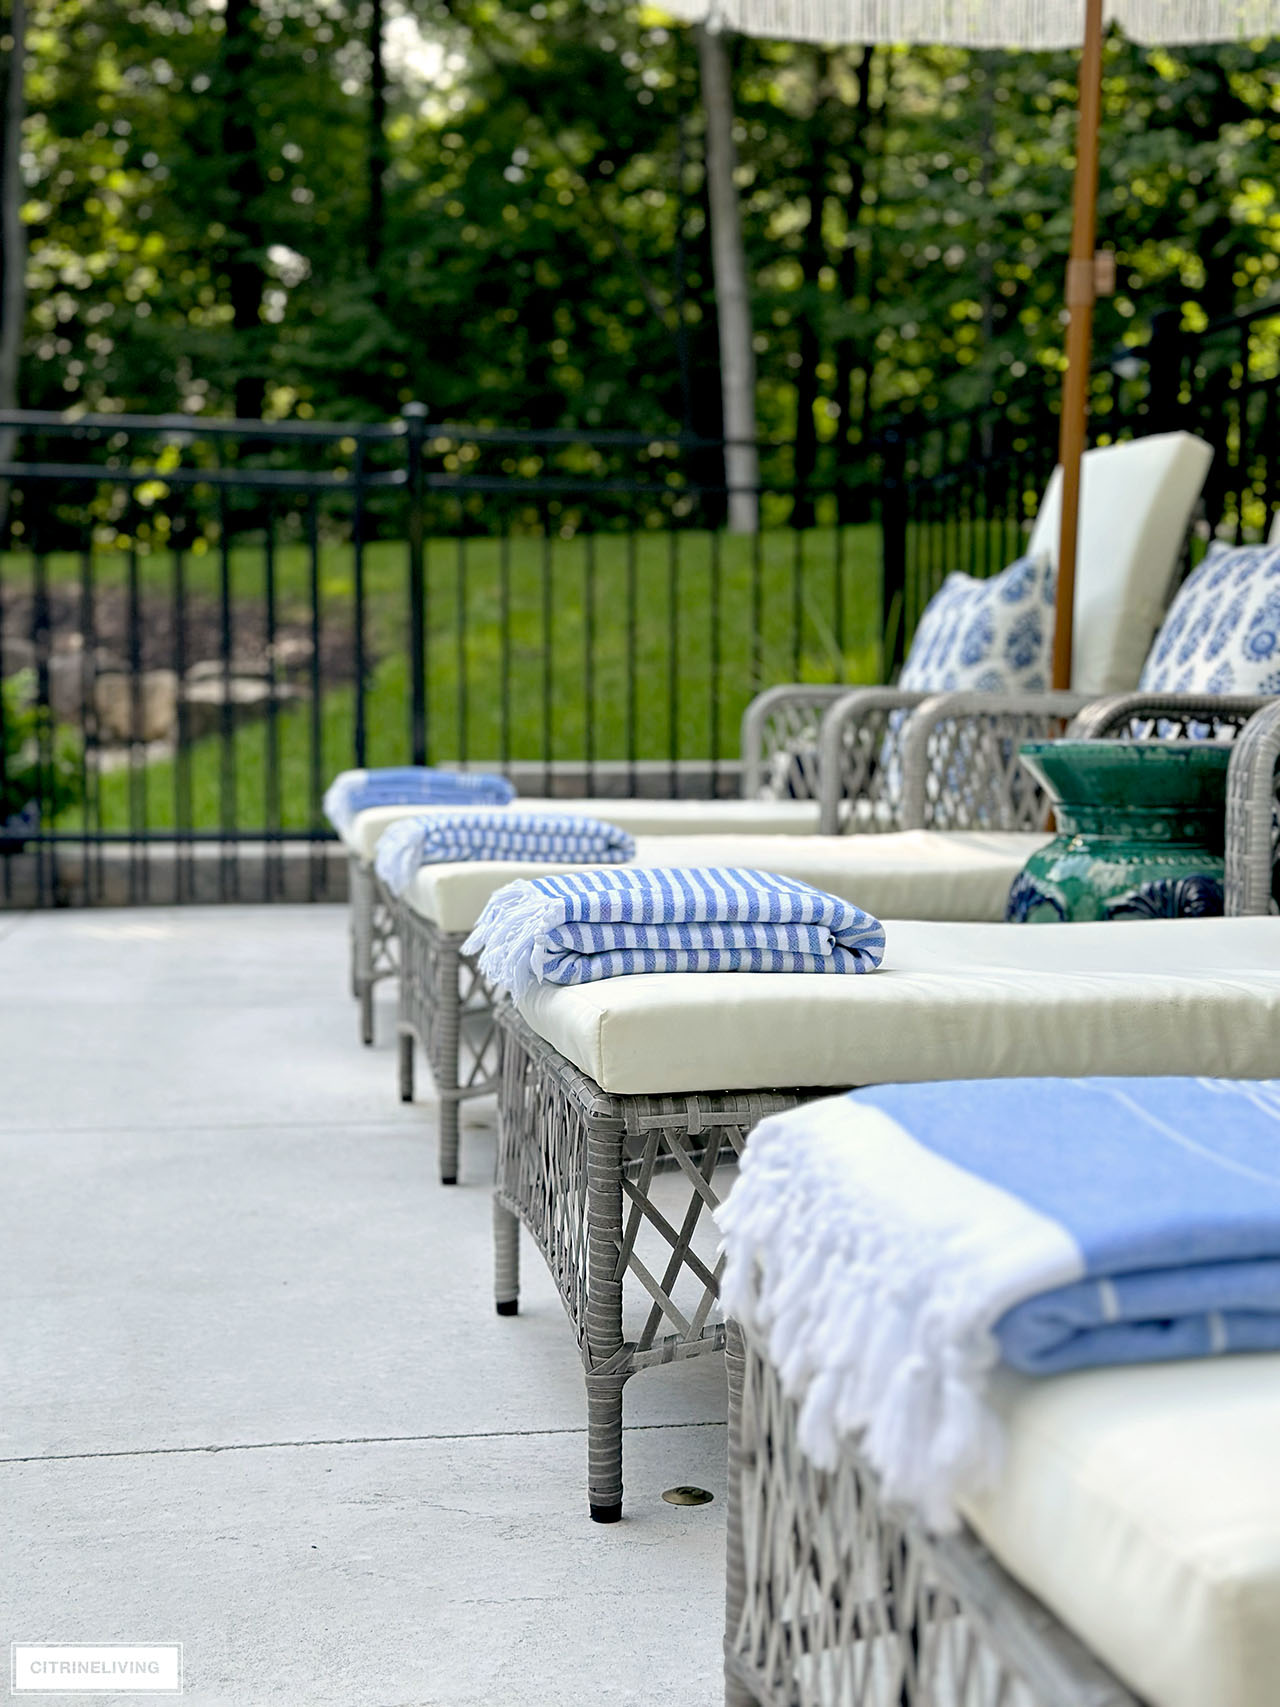 Striped towels styled on pool loungers.